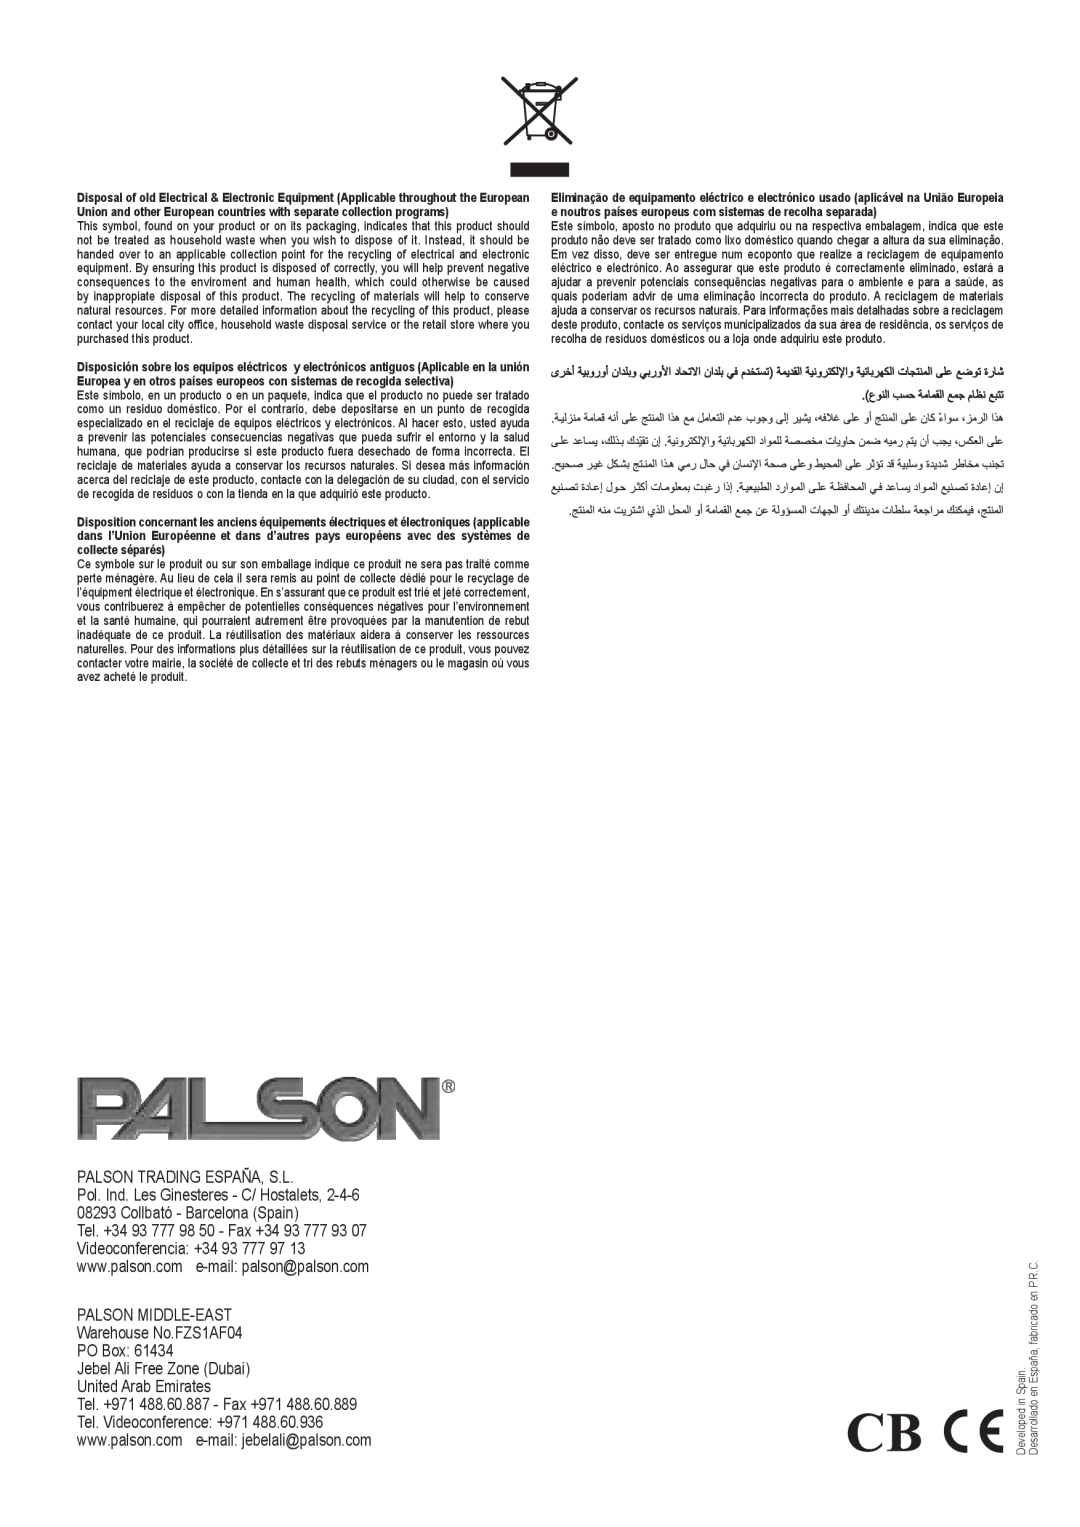 Palsonic COD. 30537 manual Palson Trading España, S.L, Palson Middle-East, Warehouse No.FZS1AF04 PO Box 